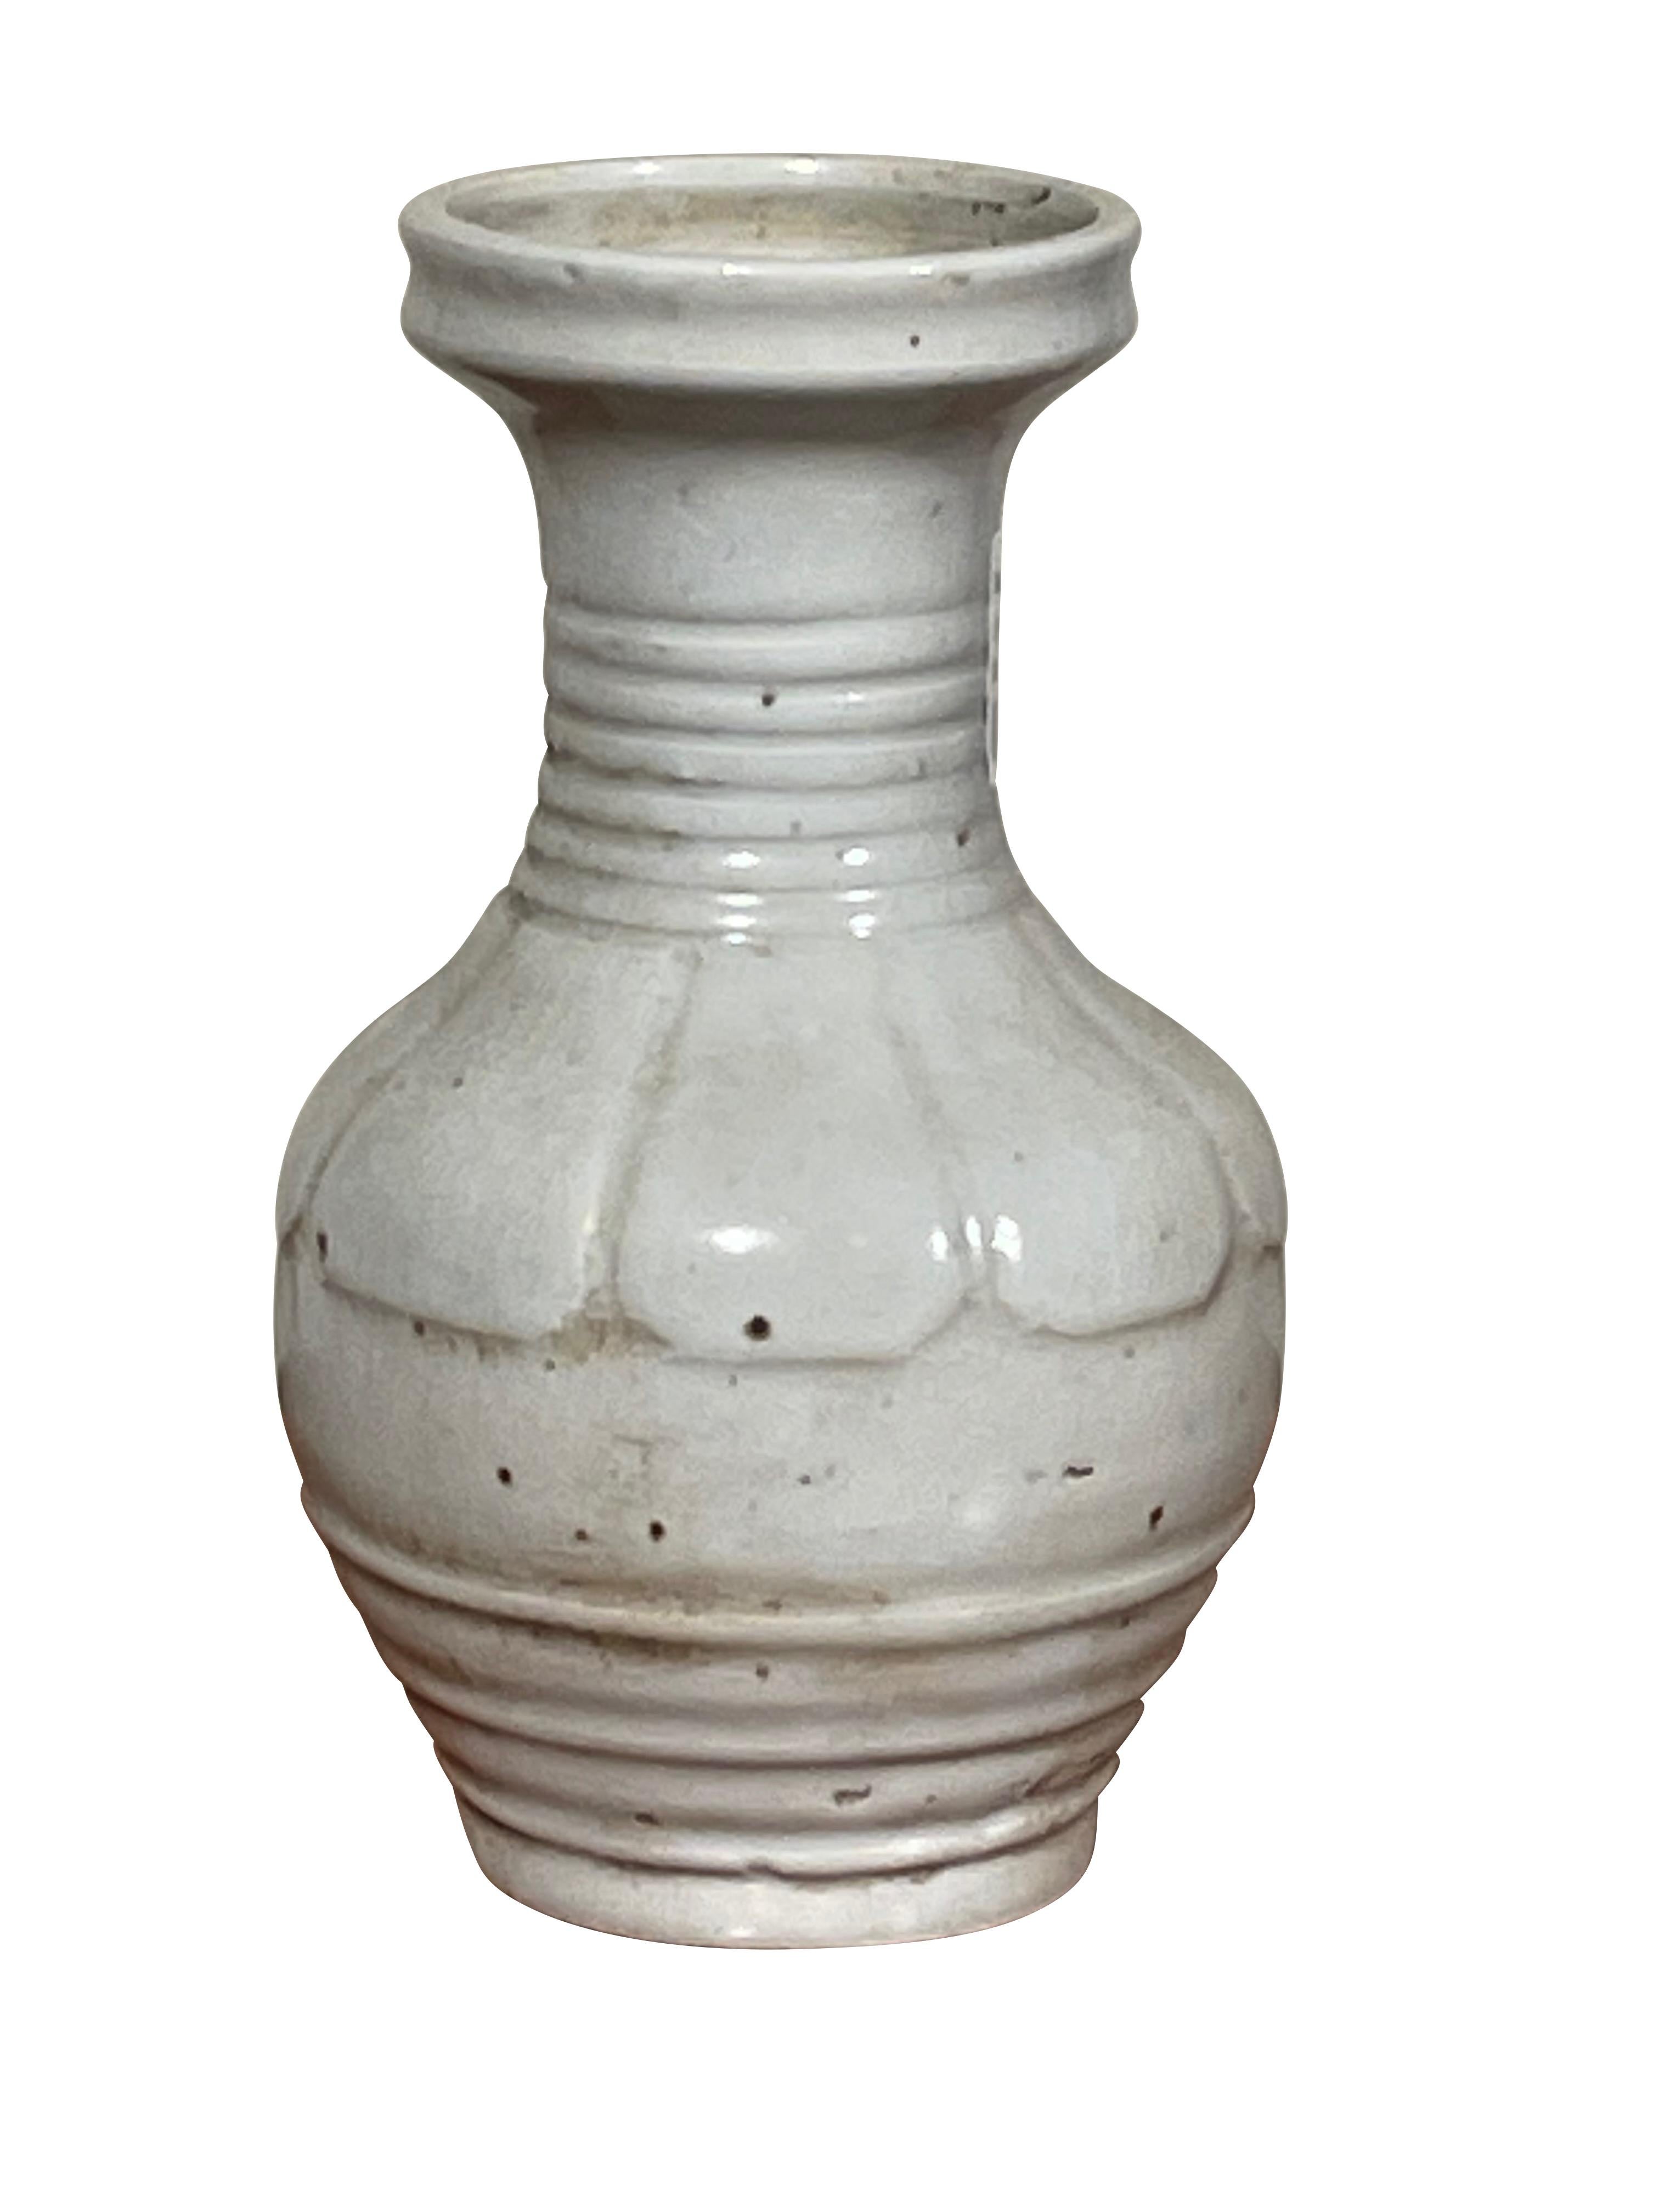 Contemporary Chinese decorative patterned white vase.
Horizontal bands decoration.
From a collection of three sold individually.
ARRIVING MARCH